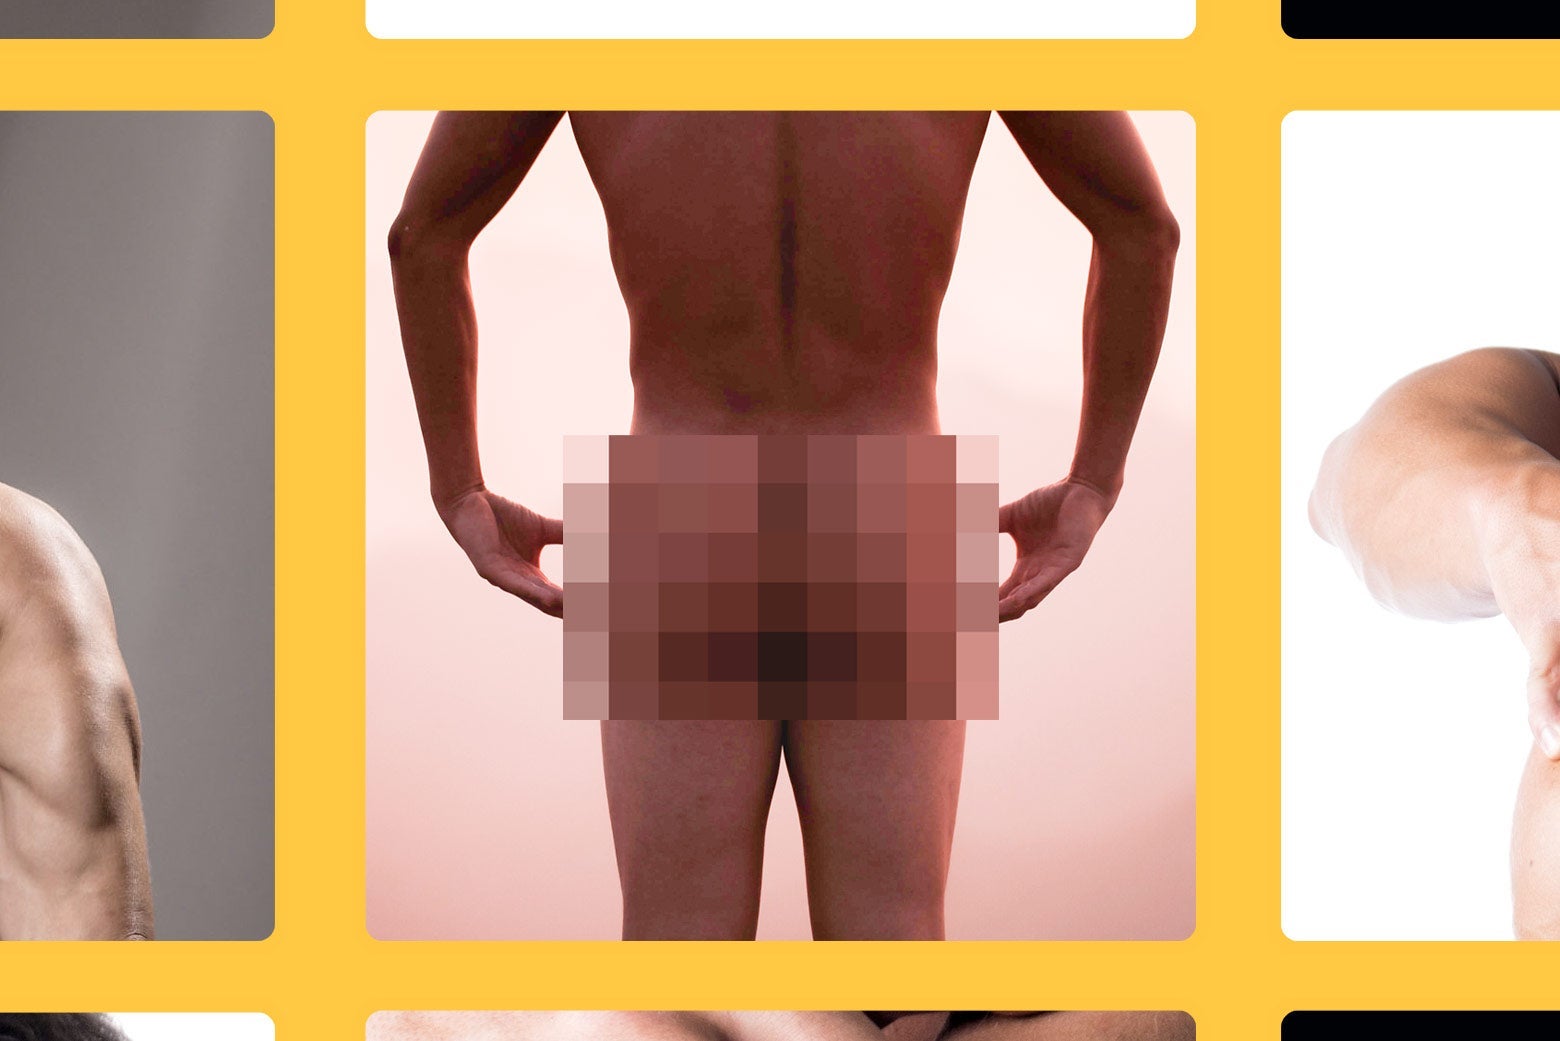 Grindr Whats behind the new rule thats surprising users?